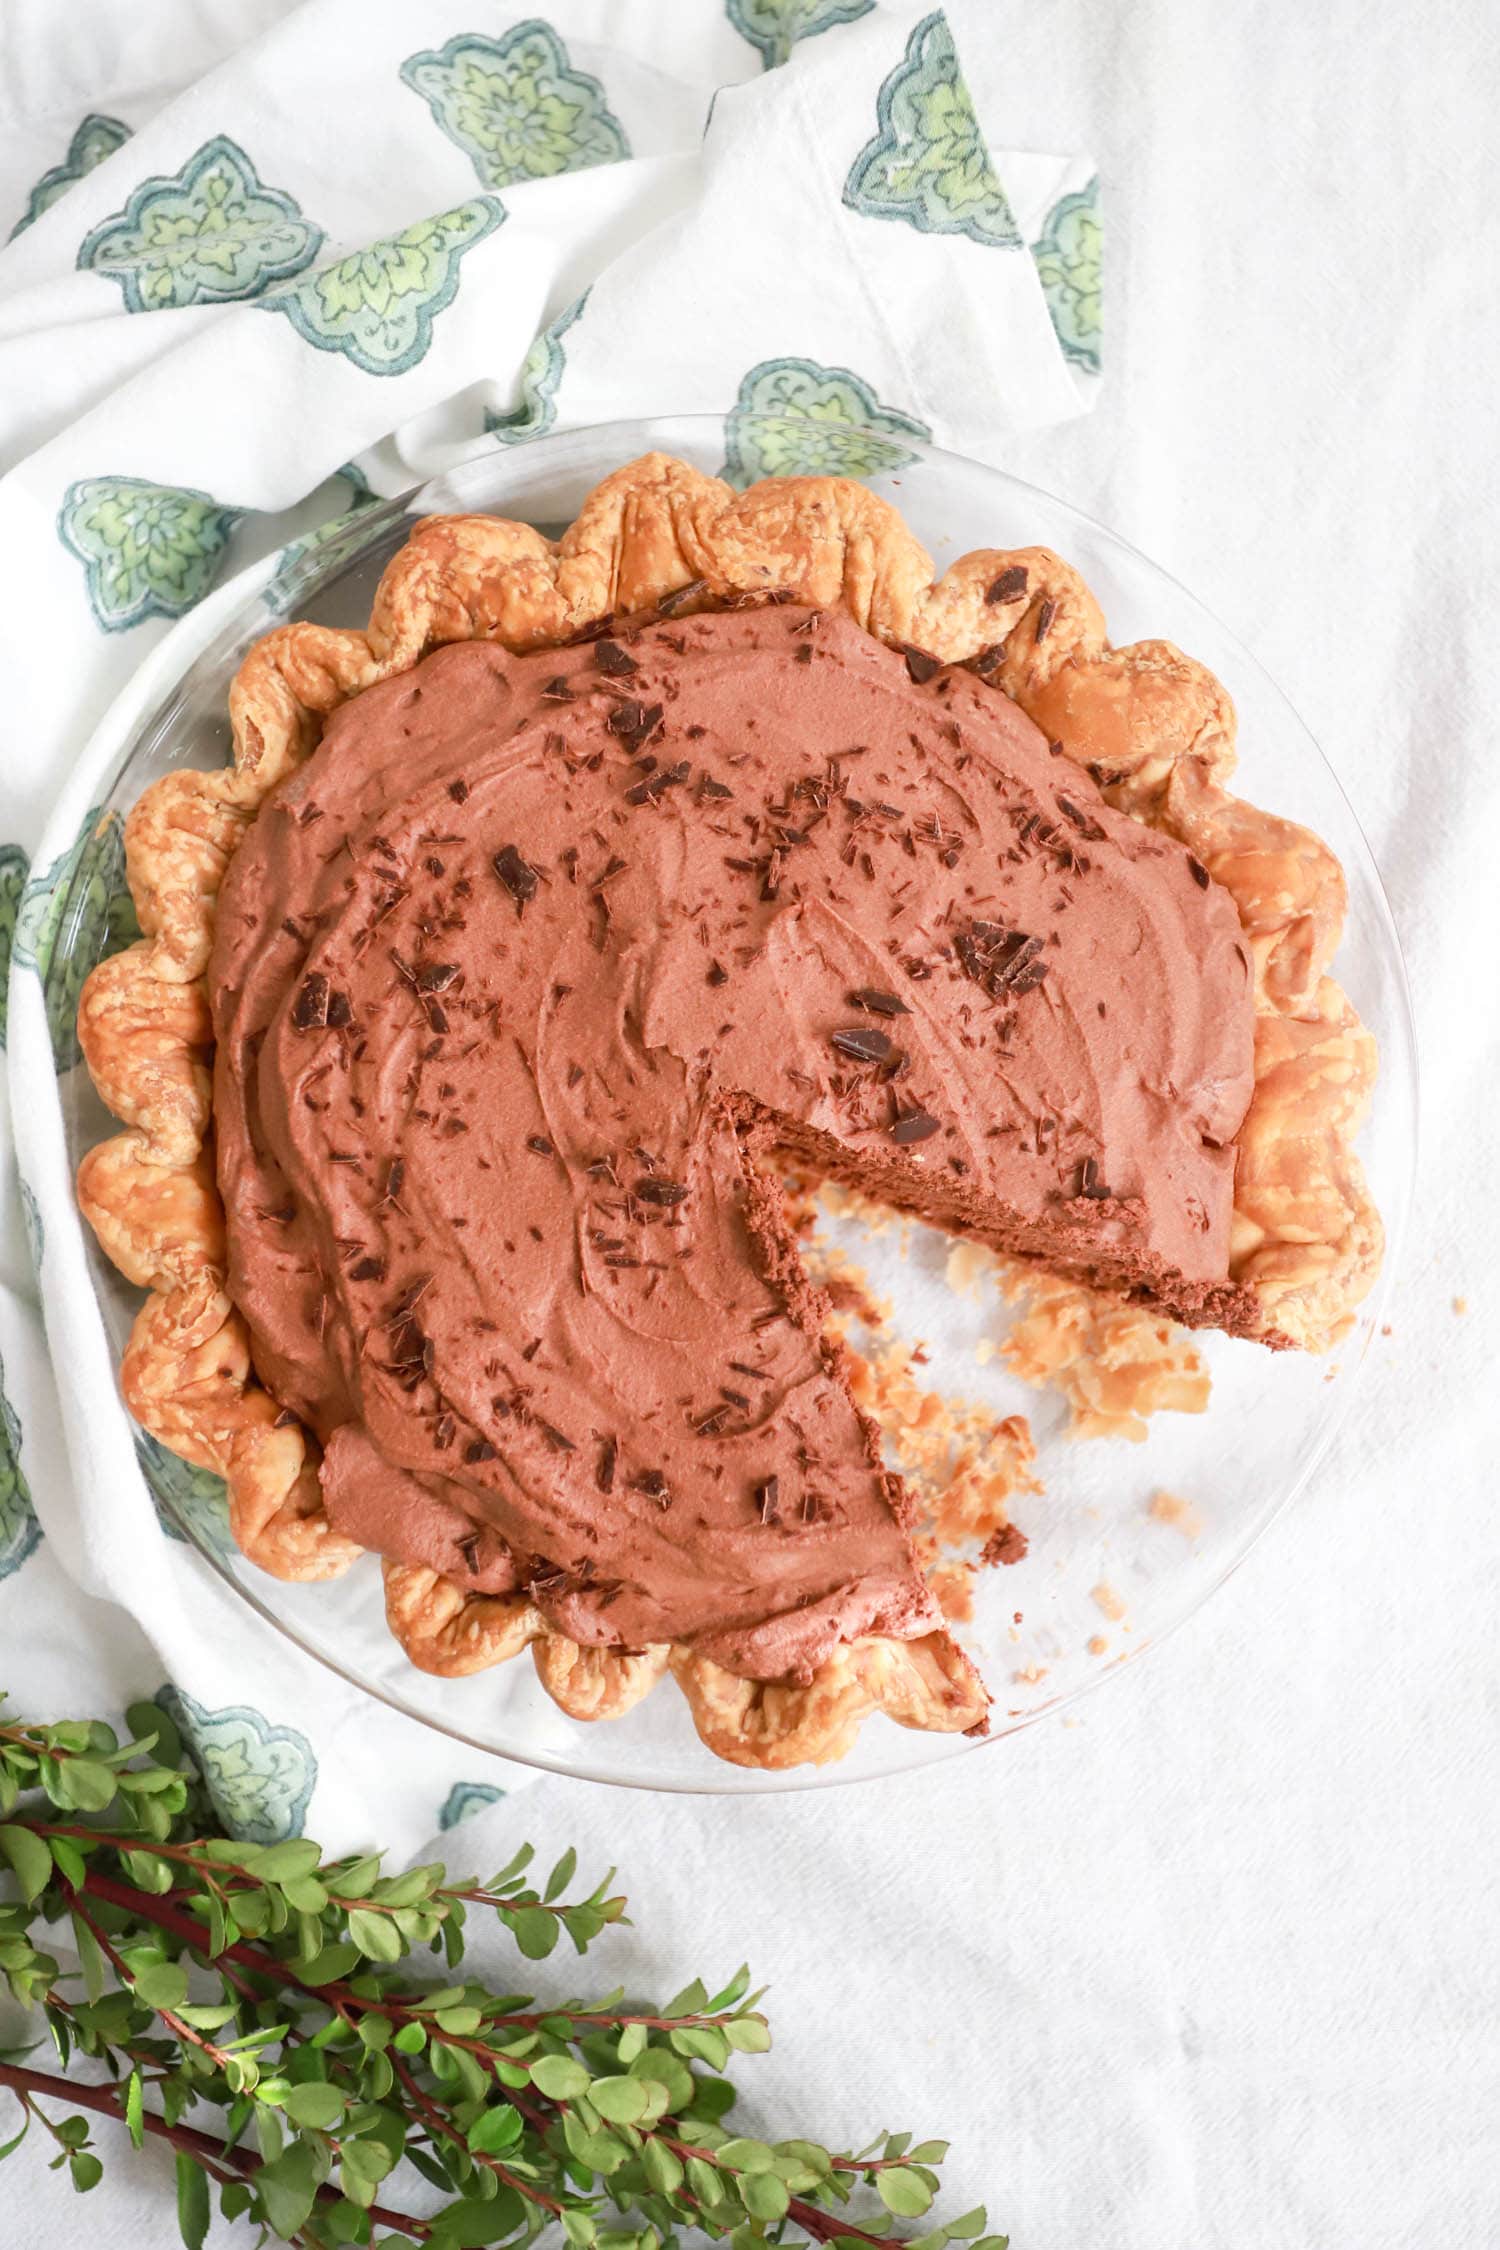 no bake chocolate mousse pie